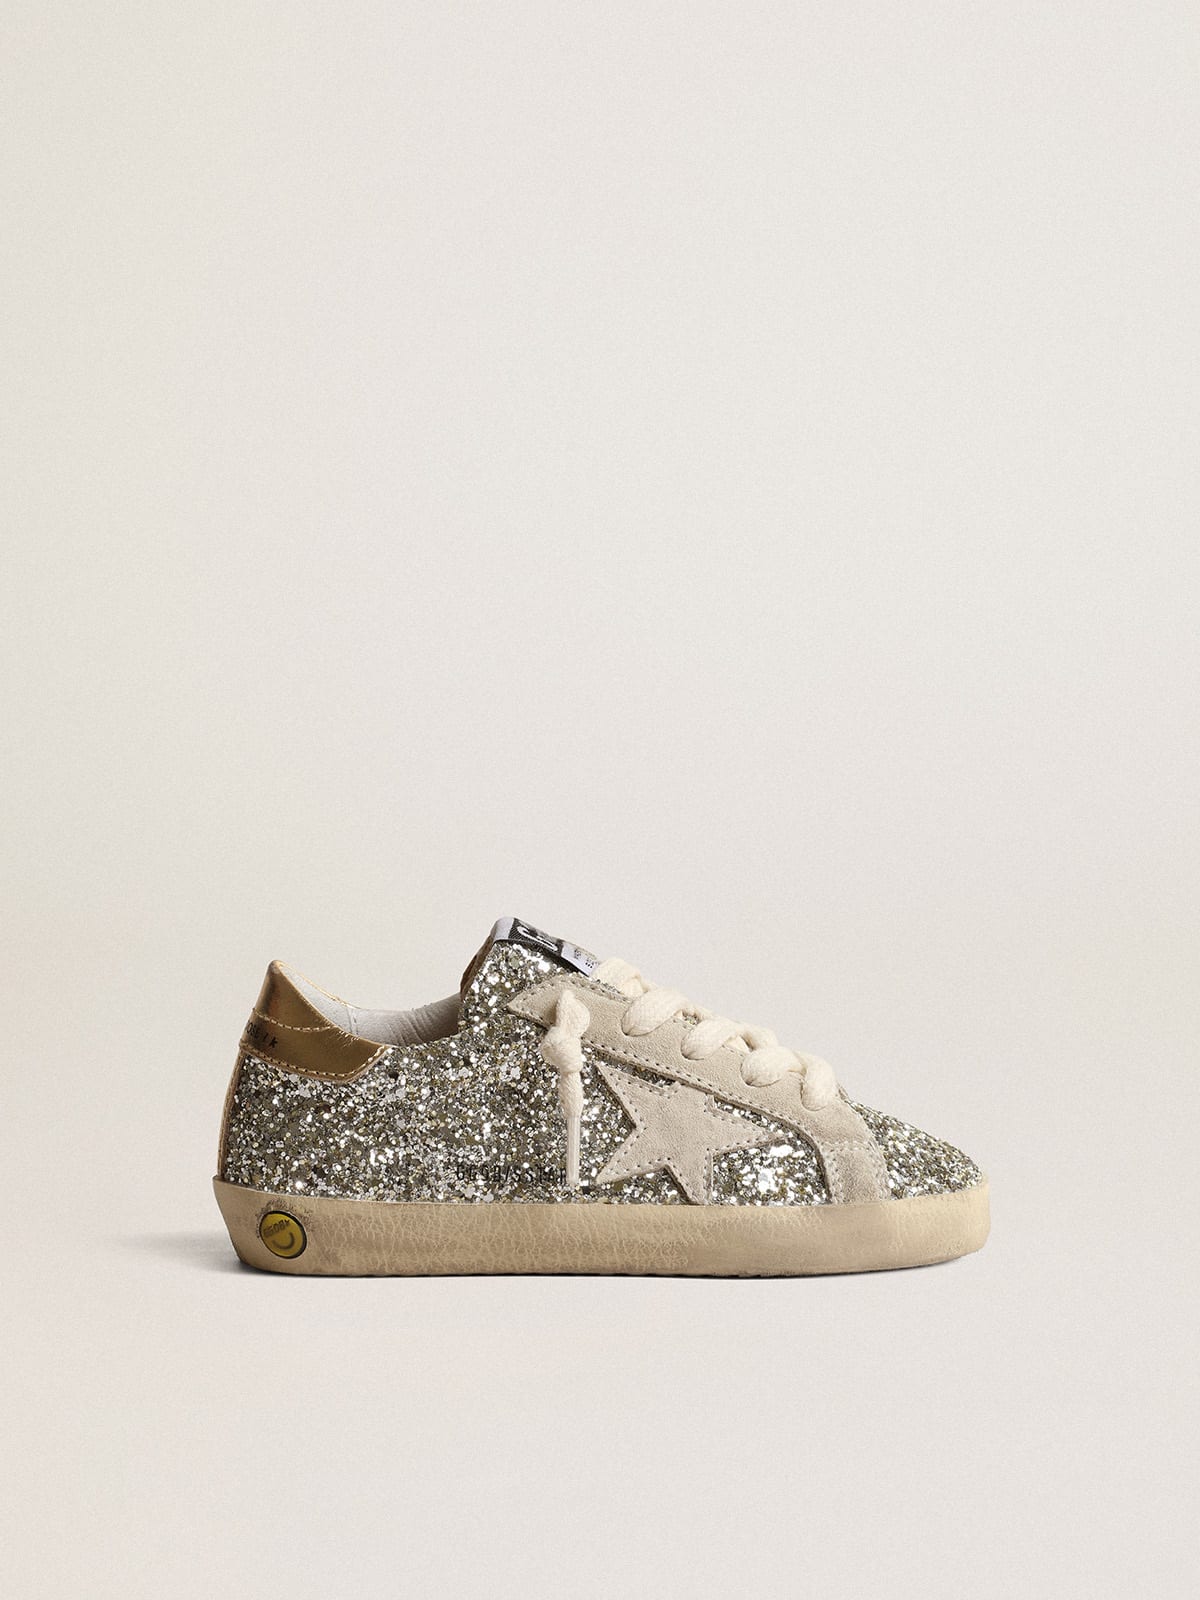 Super-Star Young in glitter with a suede star and gold heel tab